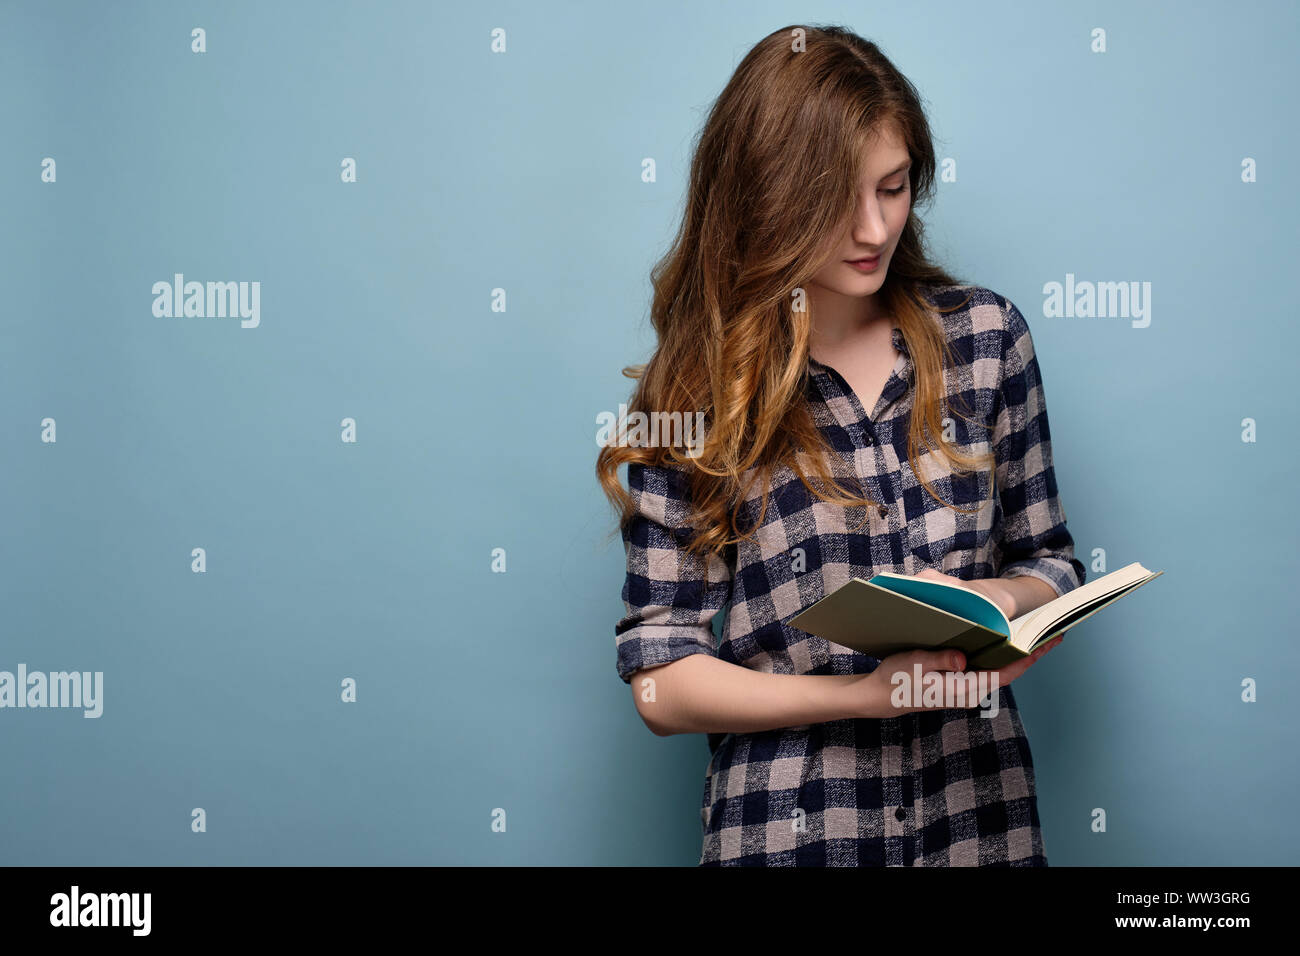 A young girl in a plaid shirt stands on a blue background and looks down in a book with his head bowed. Stock Photo